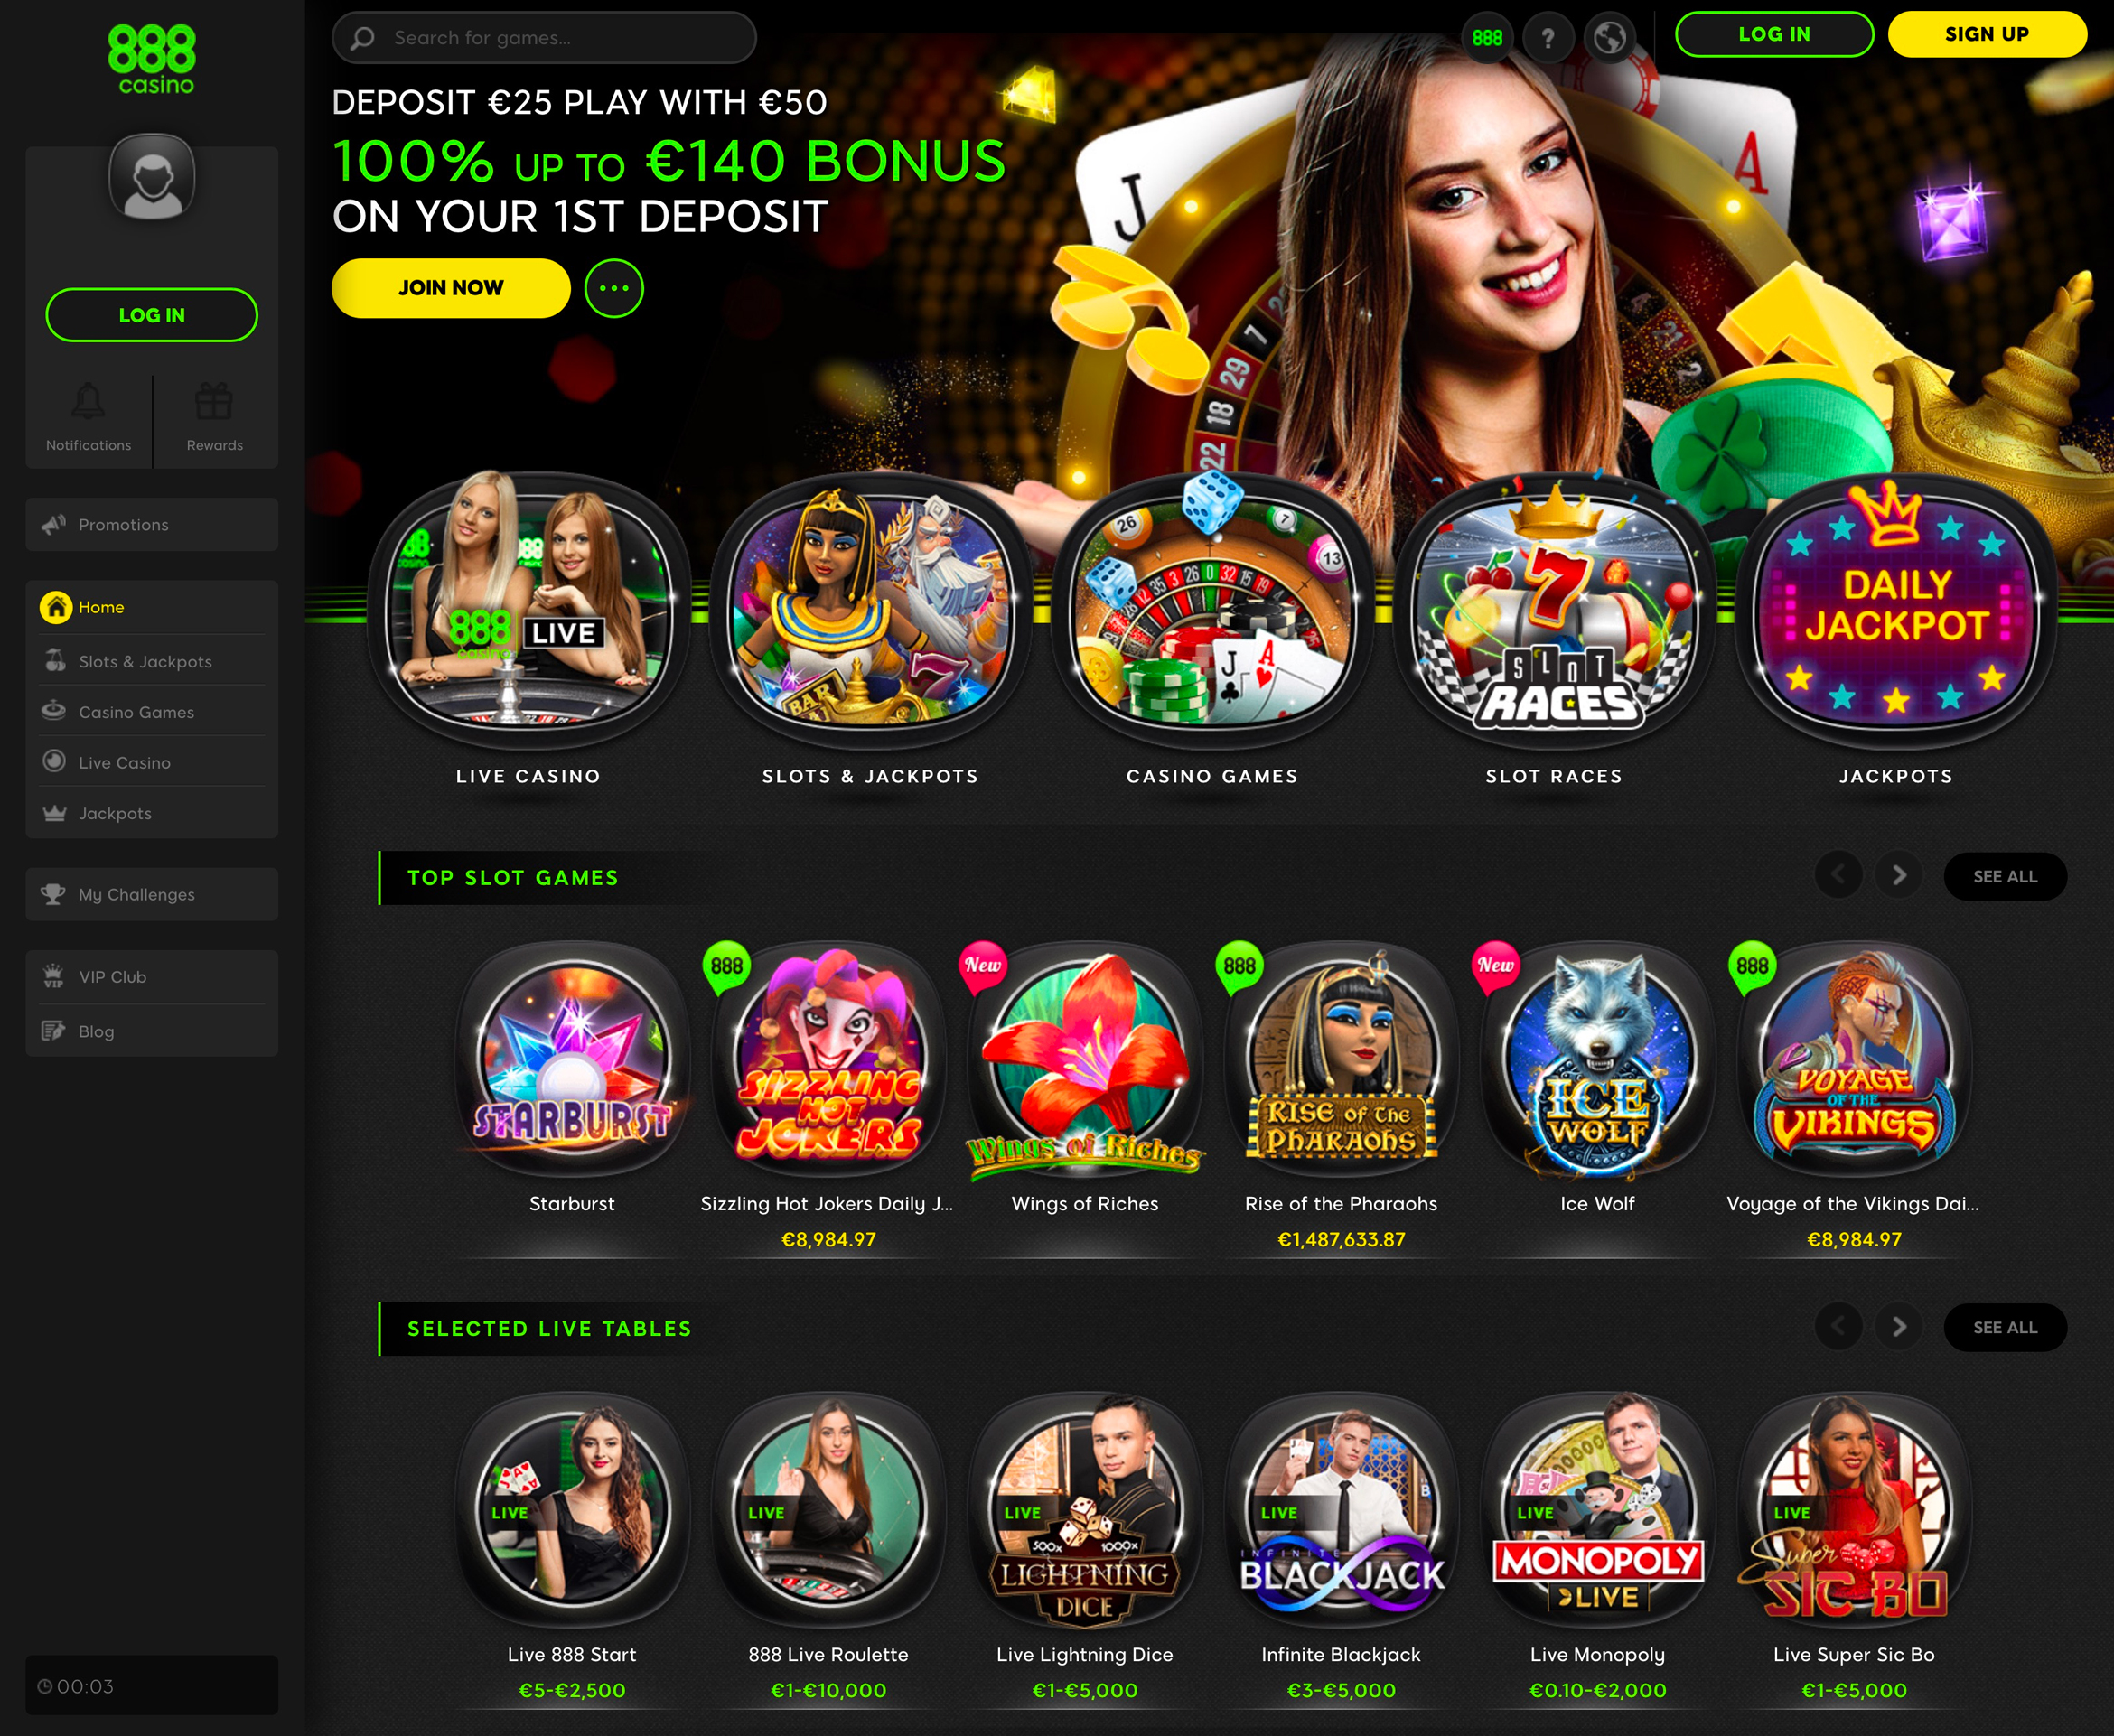 Games provided reward choices and tag modern casino online 888 online modern lzzl casino отзывы